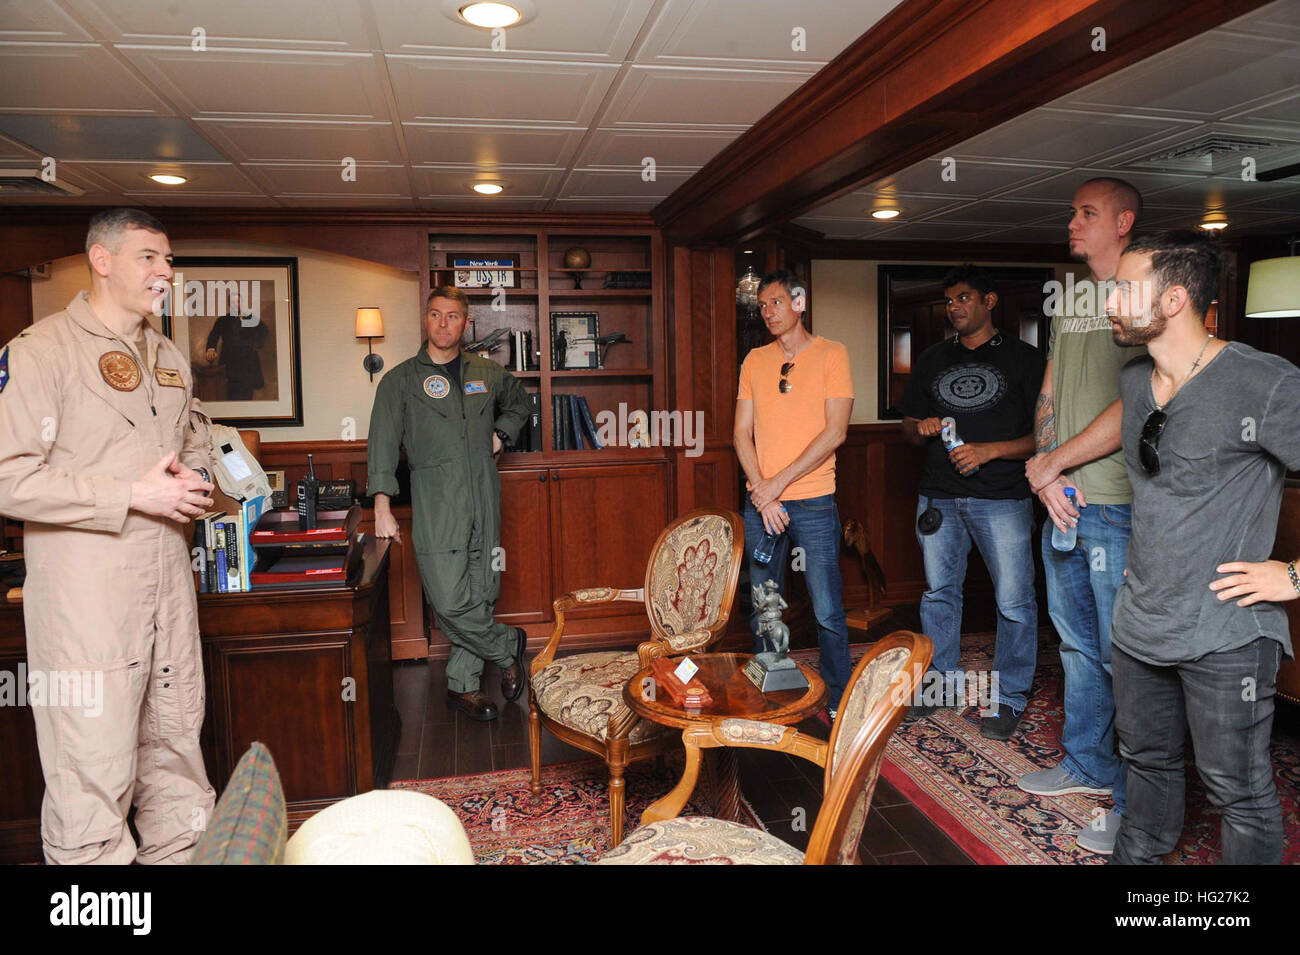 150525-N-FI568-254 U.S. 5TH FLEET AREA OF OPERATIONS (May 25, 2015)- Members of the band for American Idol winner David Cook speak with Capt. Daniel Grieco, commanding officer of the aircraft carrier USS Theodore Roosevelt (CVN 71), before a concert and meet-and-greet onboard. Theodore Roosevelt is deployed in the U.S. 5th Fleet area of operations supporting Operation Inherent Resolve, strike operations in Iraq and Syria as directed, maritime security operations and theater security cooperation efforts in the region. (U.S. Navy photo by Mass Communication Specialist 3rd Class Taylor L. Jackson Stock Photo